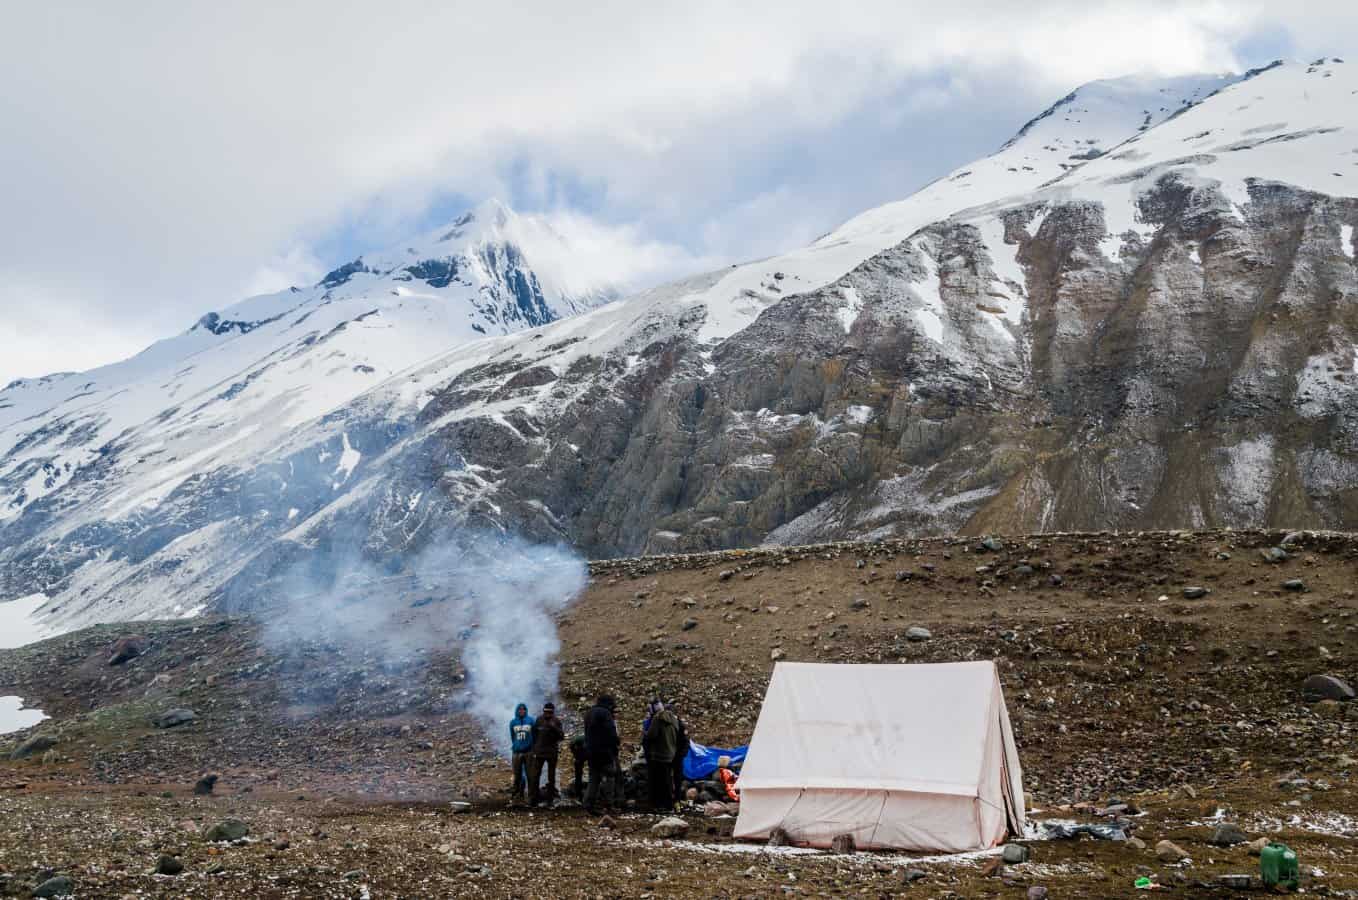 In the evening, things used to get normal. Gundar camp site [Lamkhaga pass trek expedition 2015]